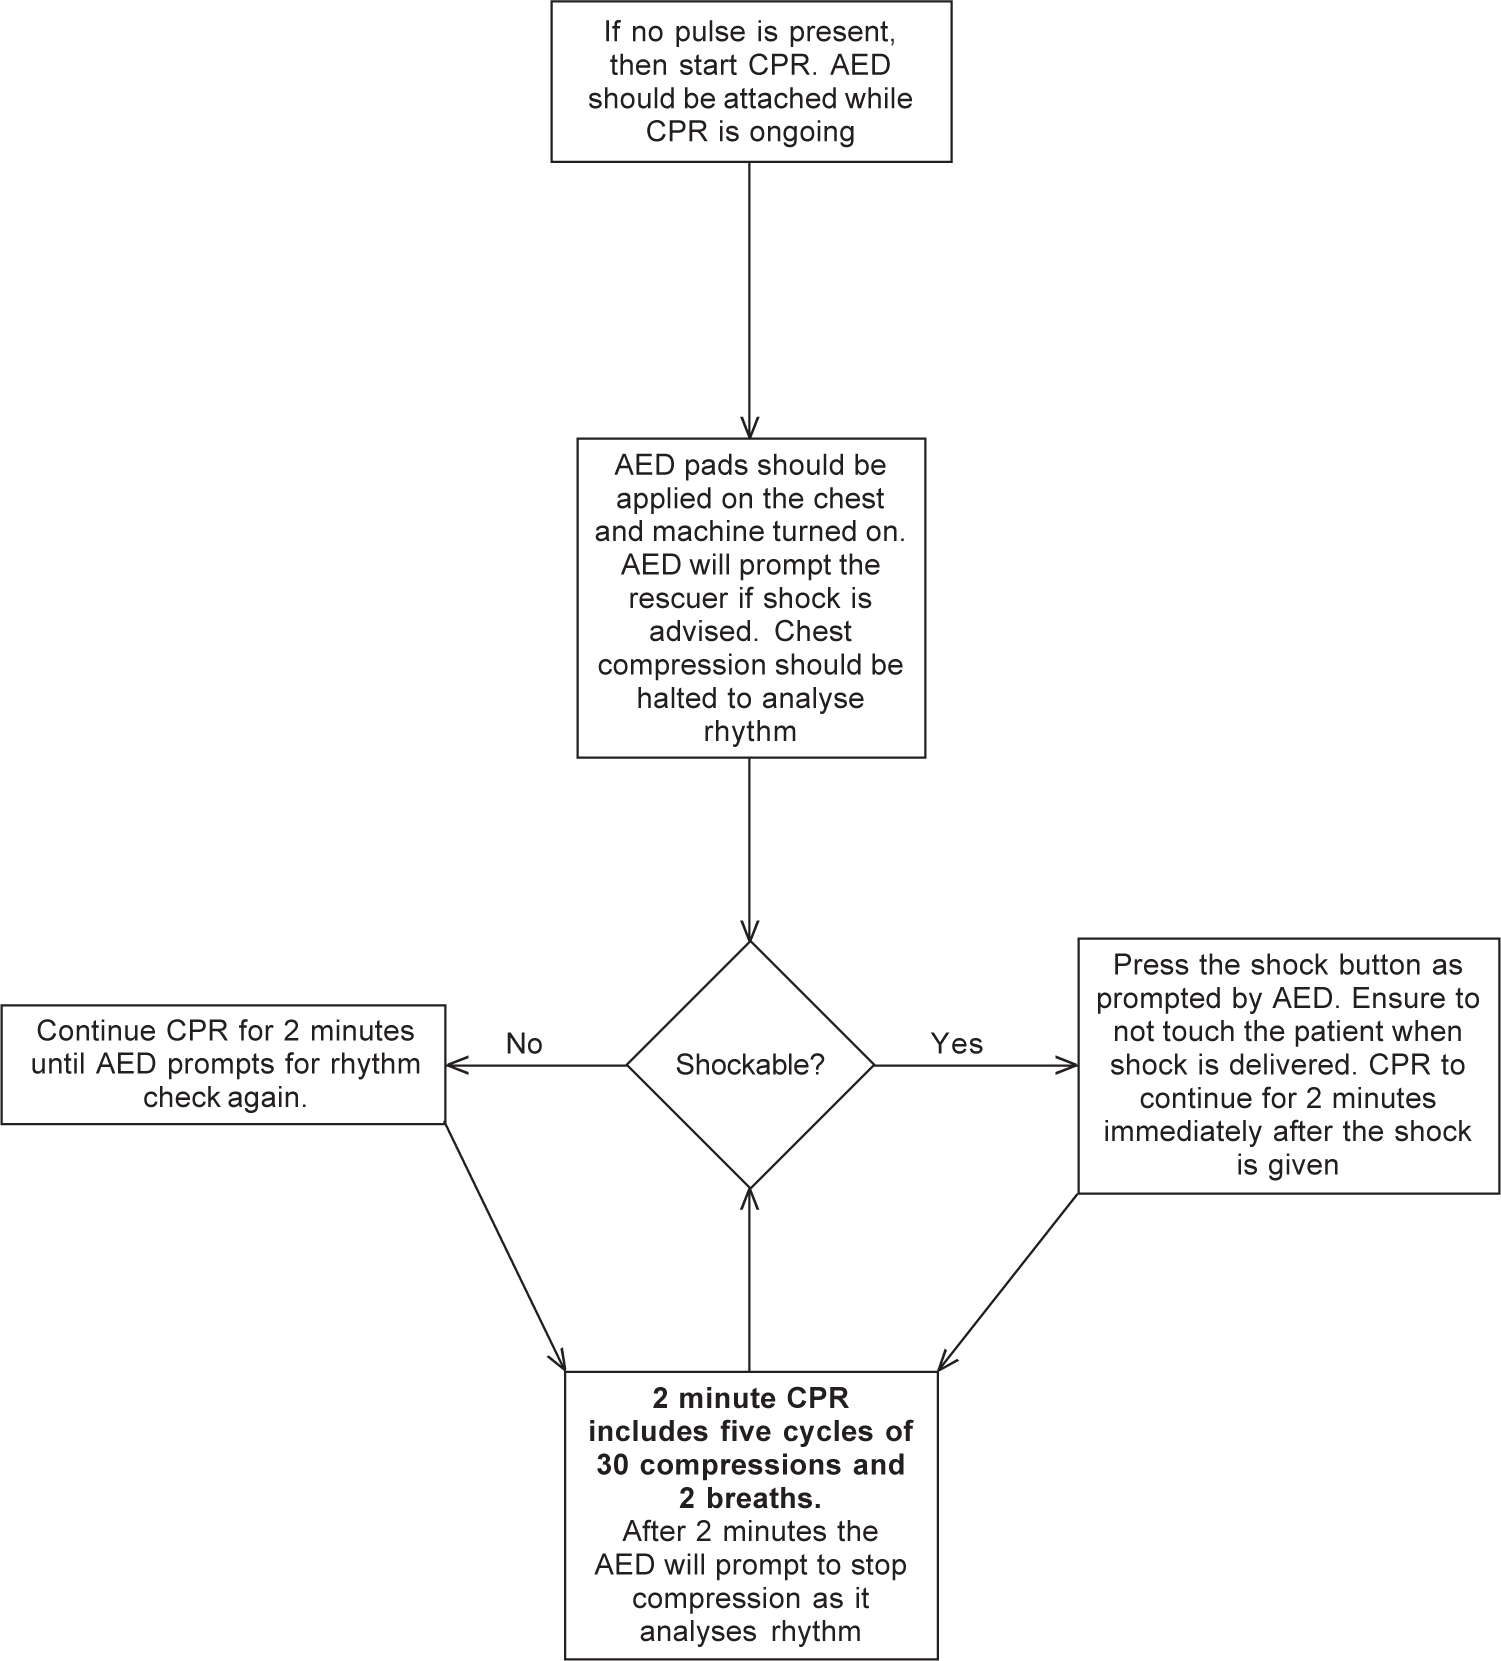 Algorithm for basic life support (BLS) if an automated external defibrillator (AED) is available. Note if a manual defibrillator is available in BLS ambulance then rhythm will need to be assessed every 2 minutes and time keeping will be required. Shock will have to delivered manually. The manual defibrillator should be used by a trained personnel